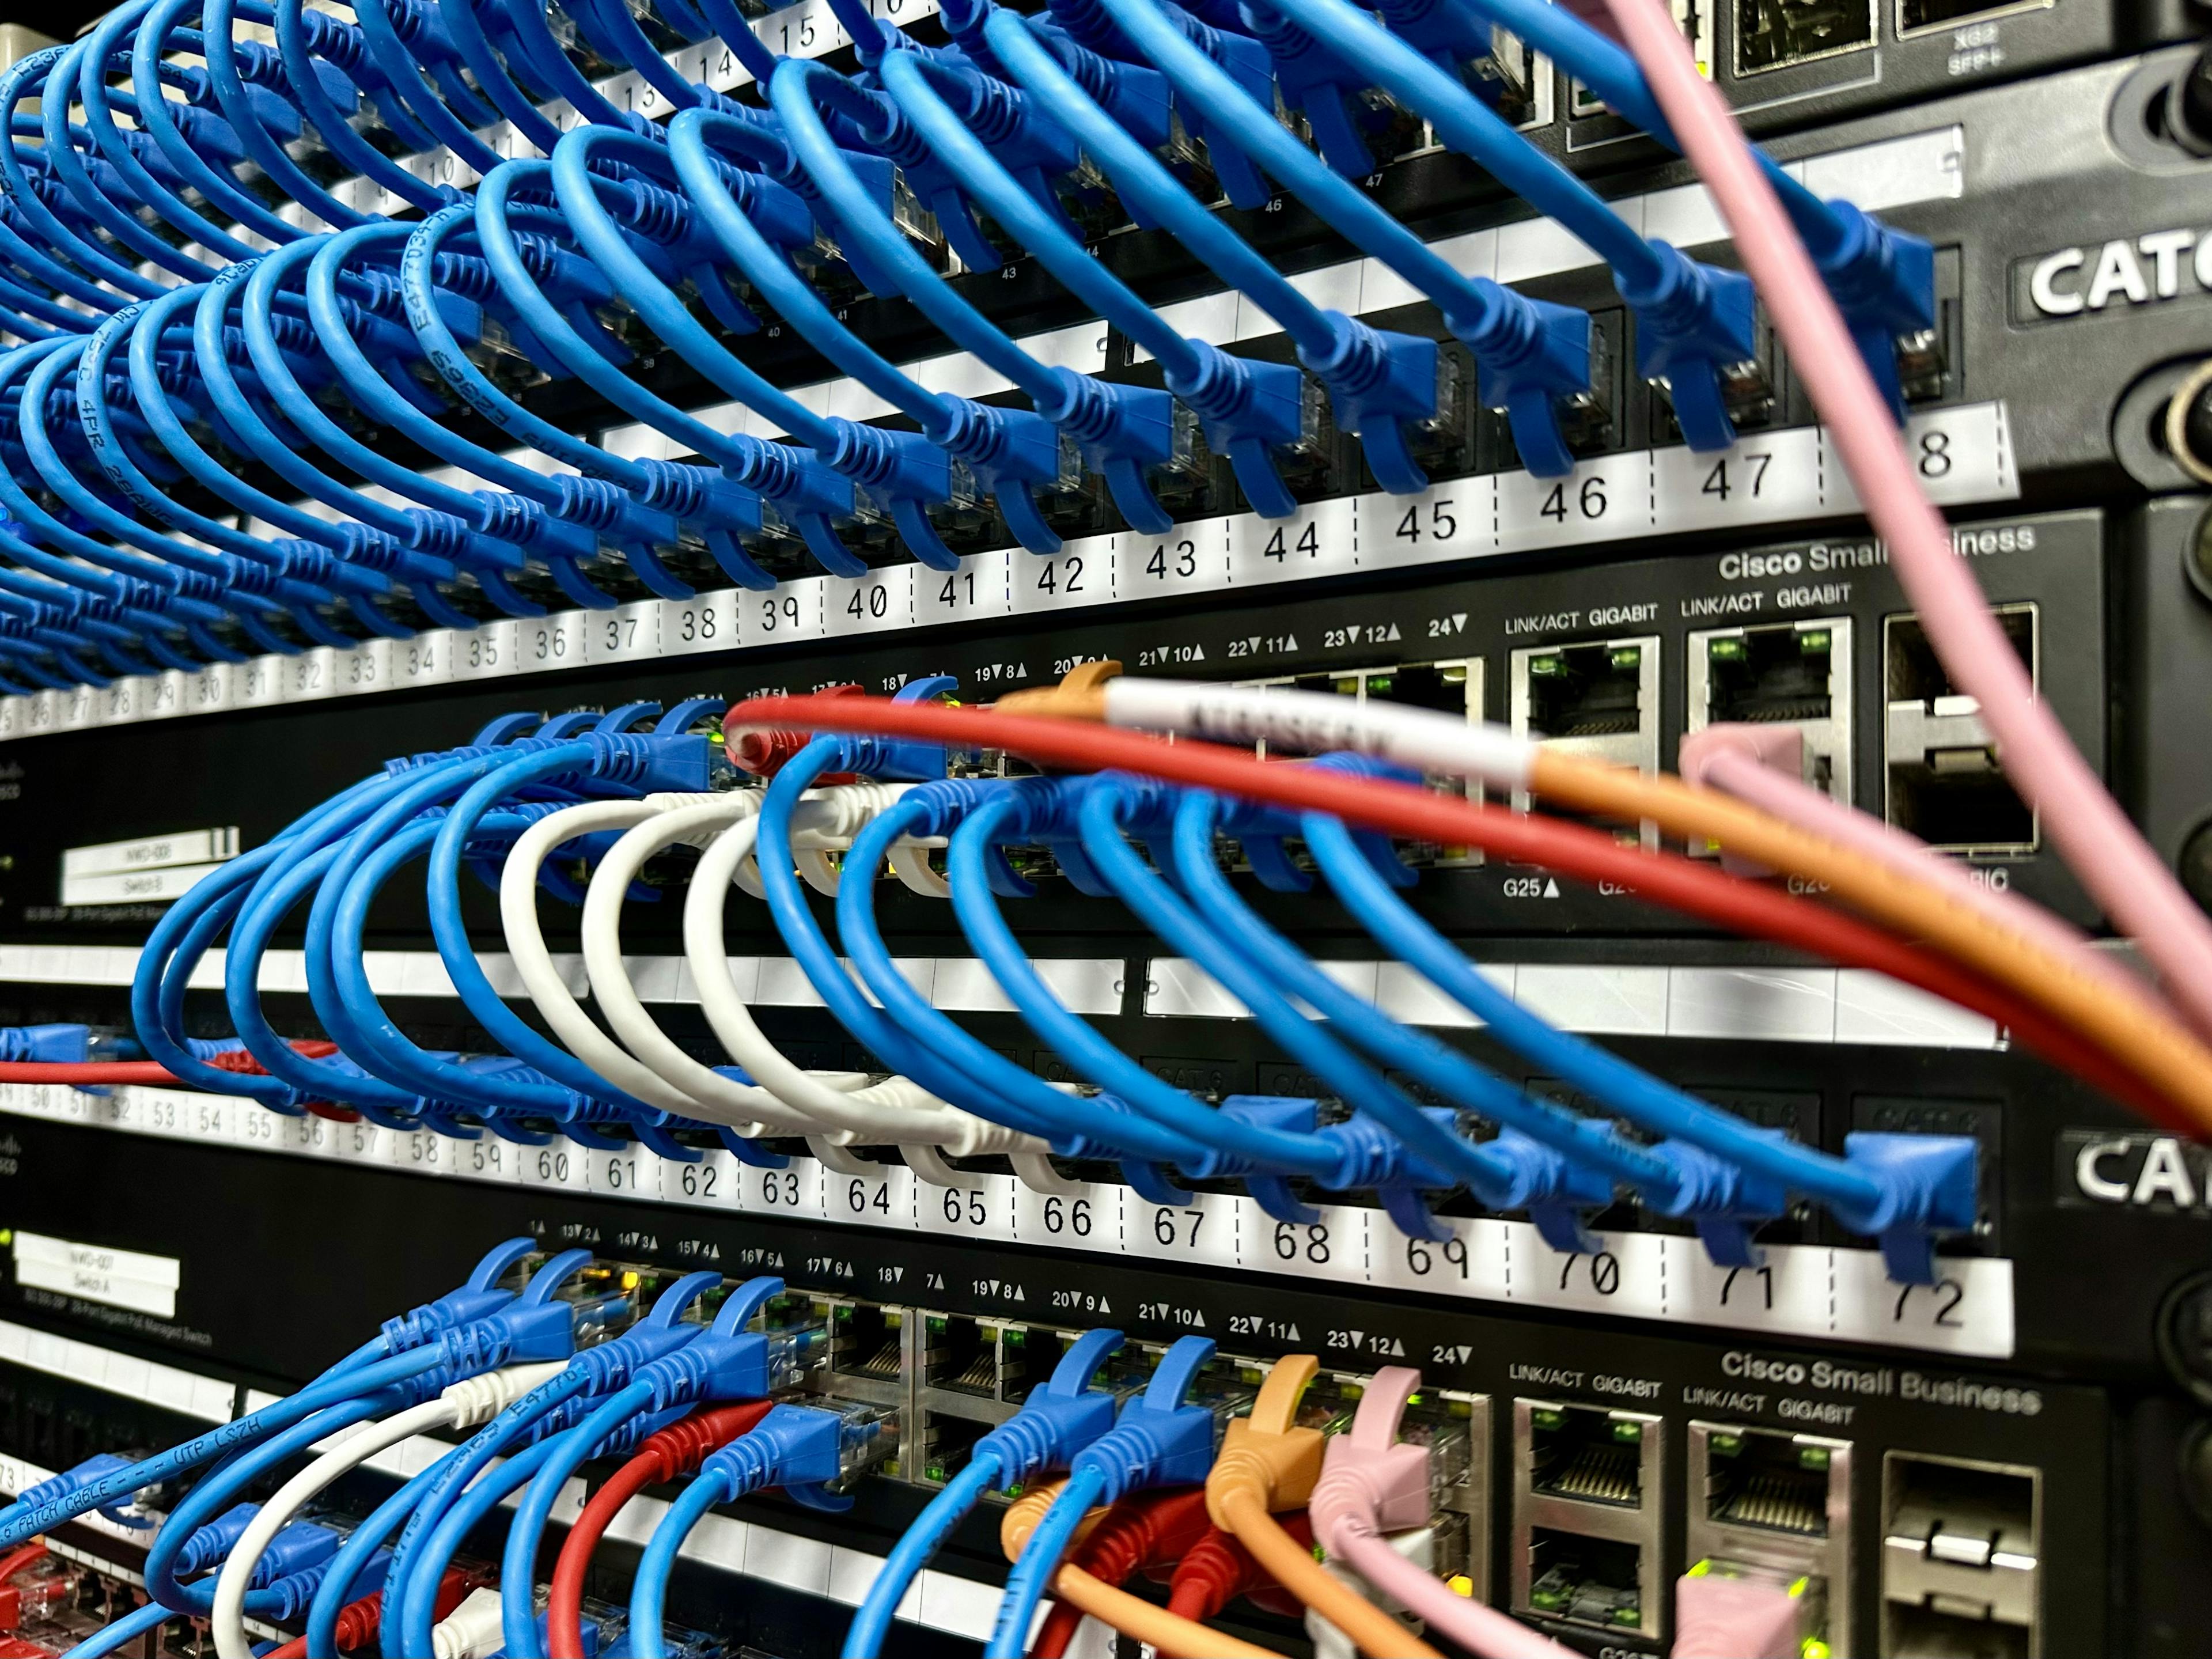 An image related to Data Cabling